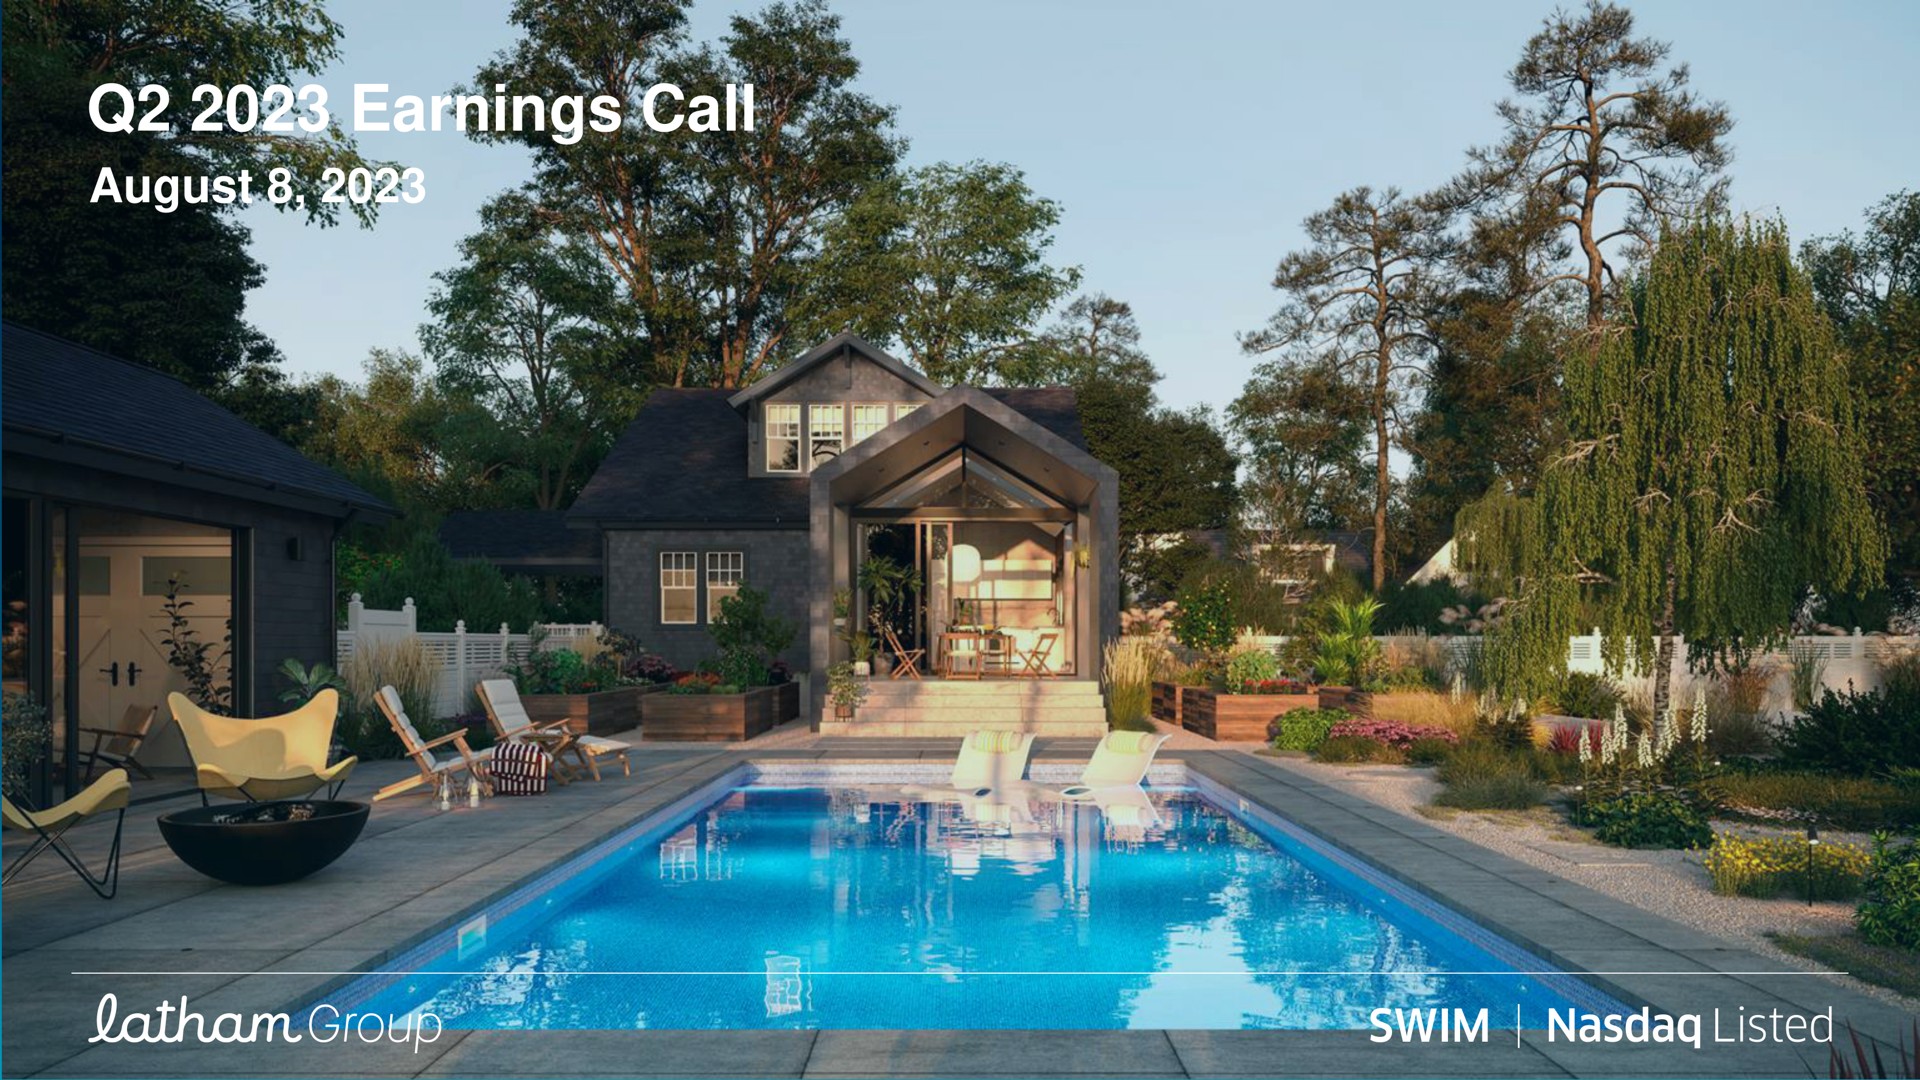 earnings call august listed | Latham Pool Company